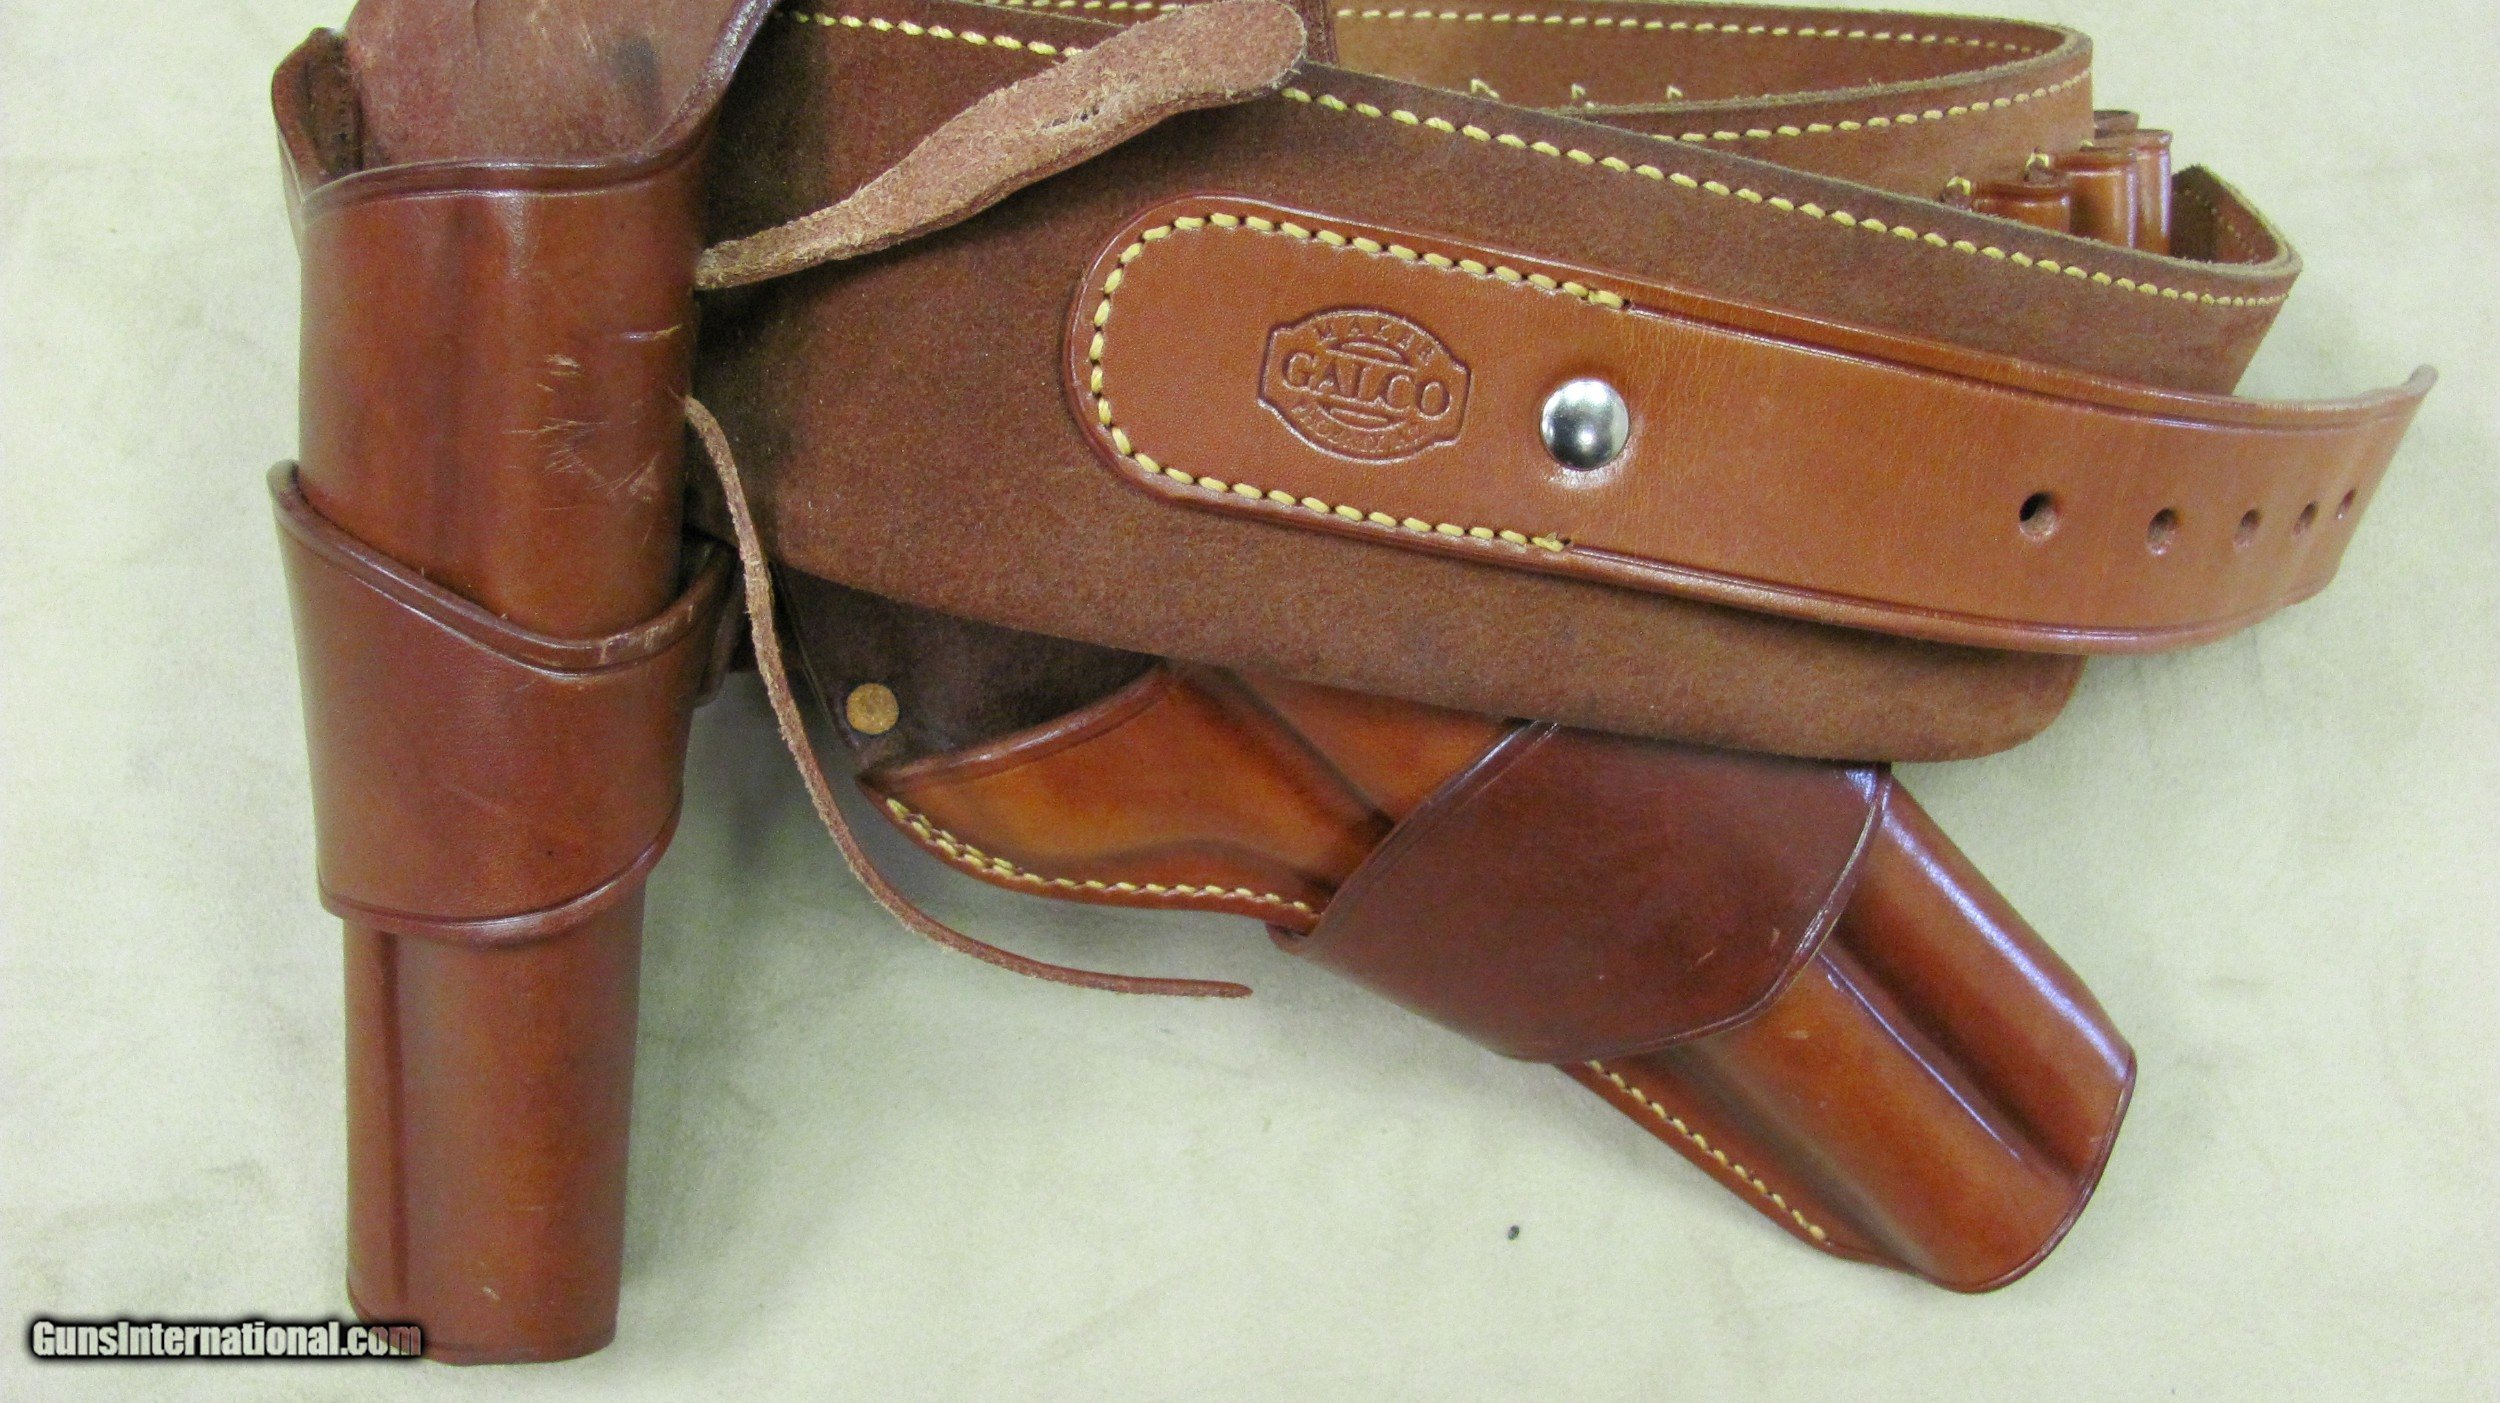 Galco "Cowboy Shoot" Double Holster/Cross Draw Rig .45 Caliber Loops 46